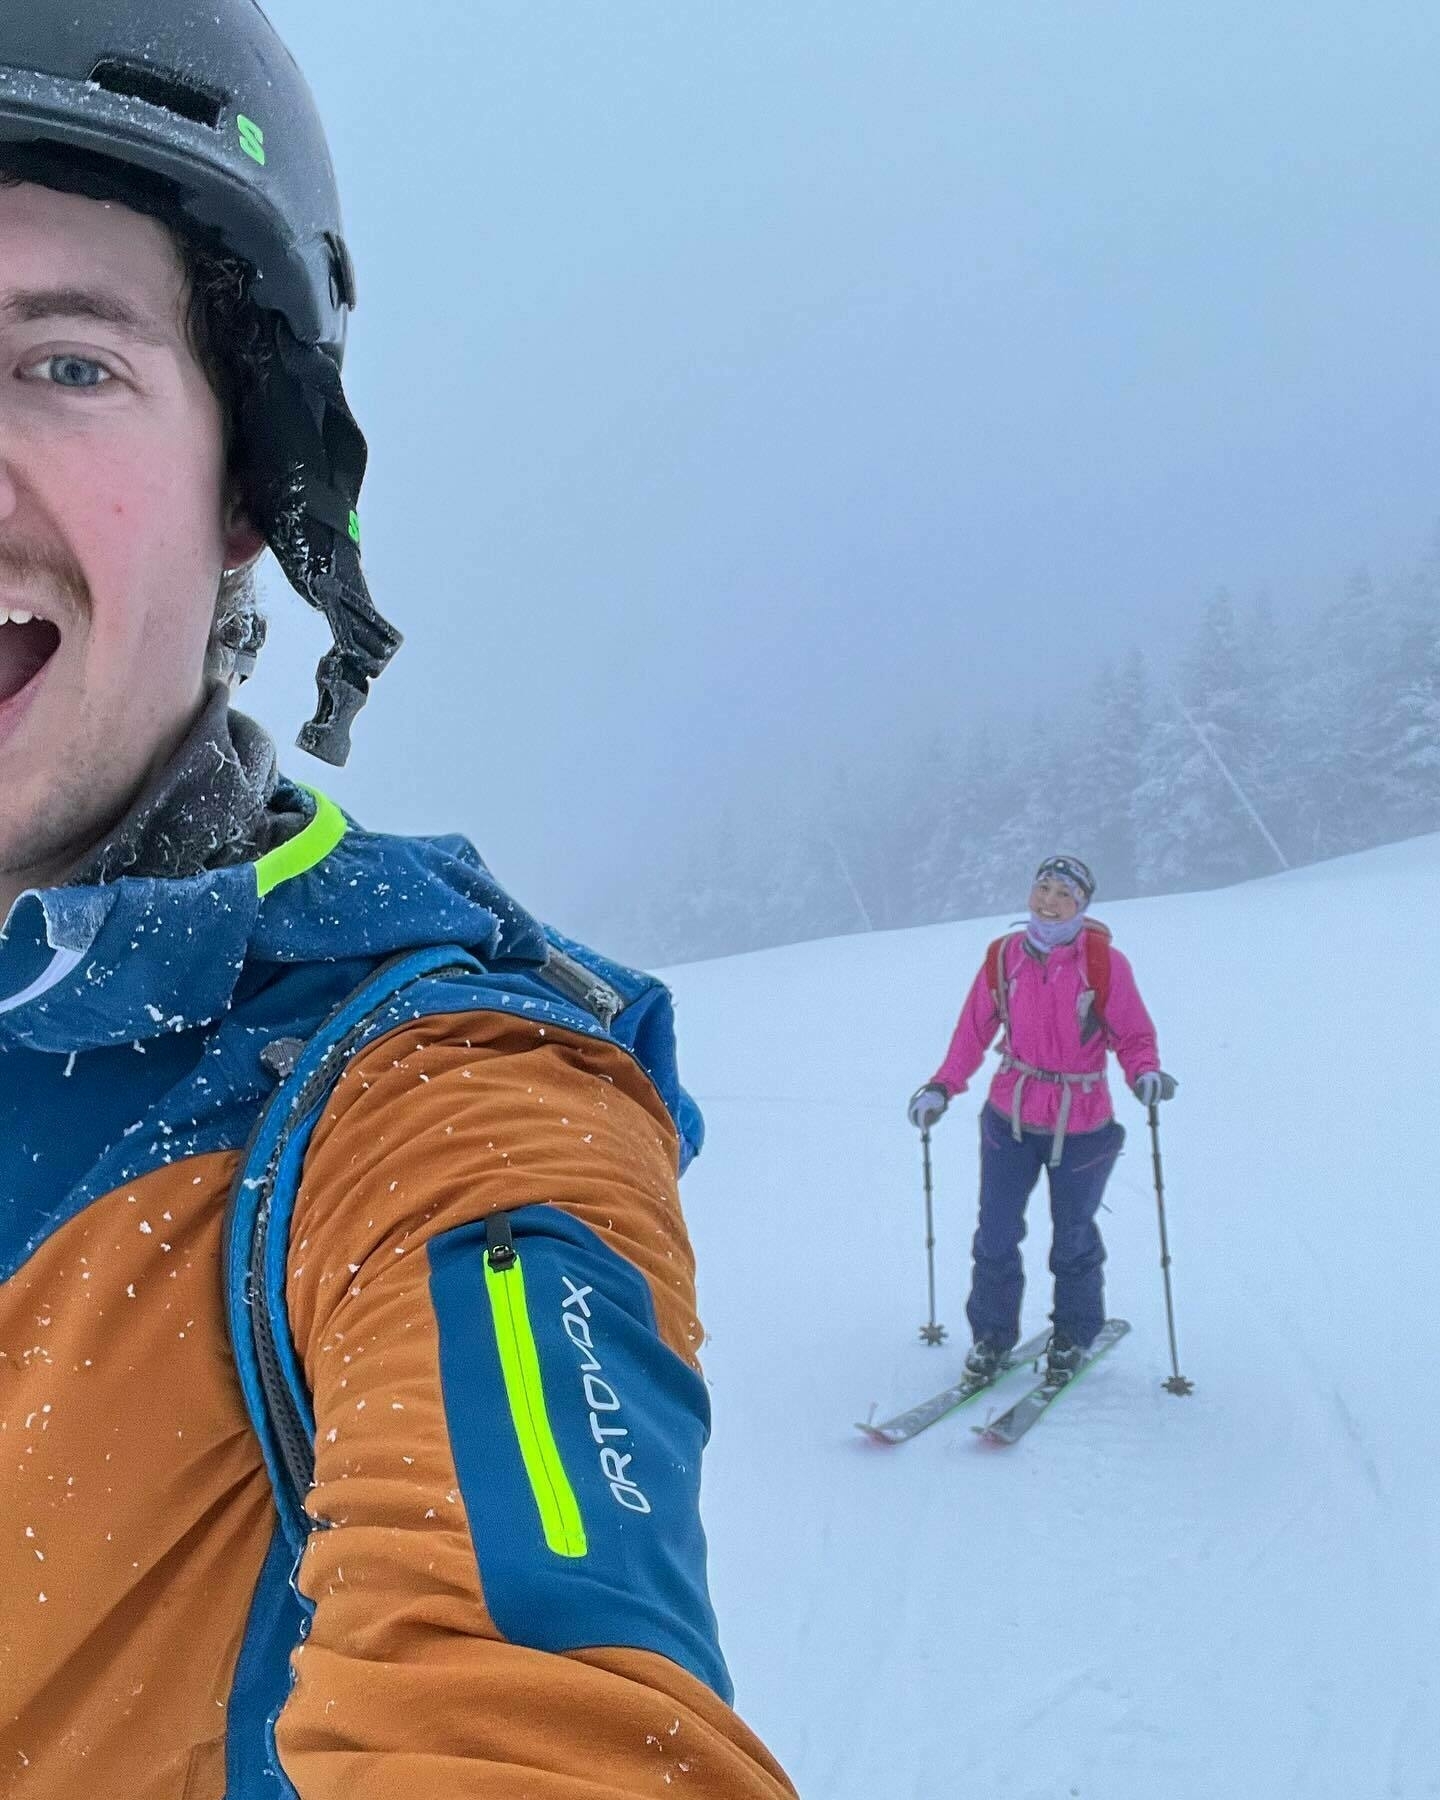 A person in the foreground takes a selfie while another skier stands in the snowy background, both on a misty mountain slope.